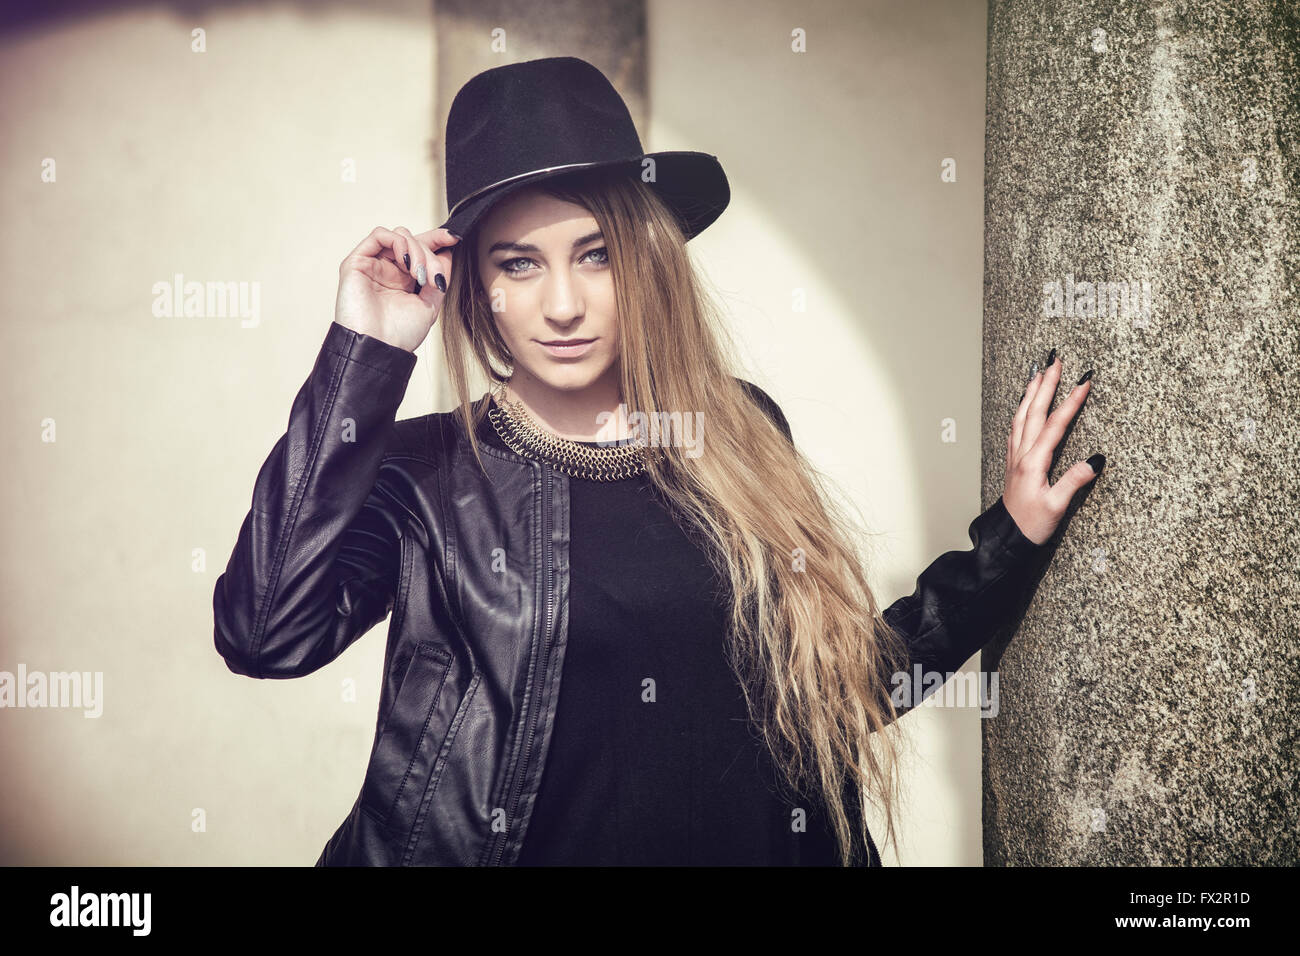 Portrait of attractive blonde young woman in black fedora hat and ...